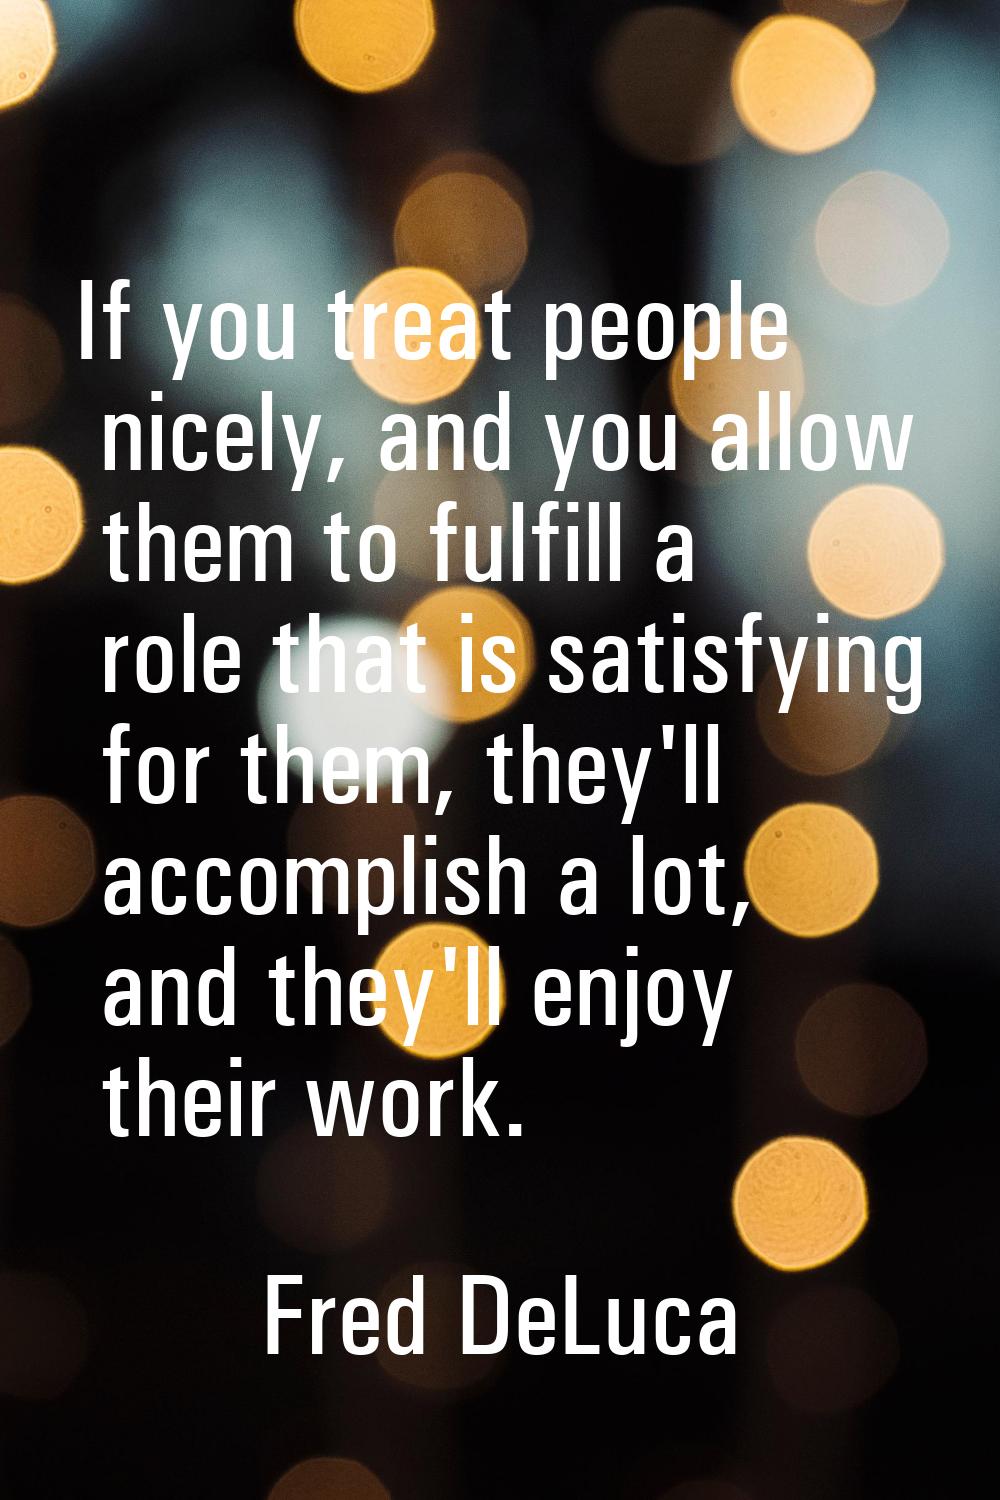 If you treat people nicely, and you allow them to fulfill a role that is satisfying for them, they'